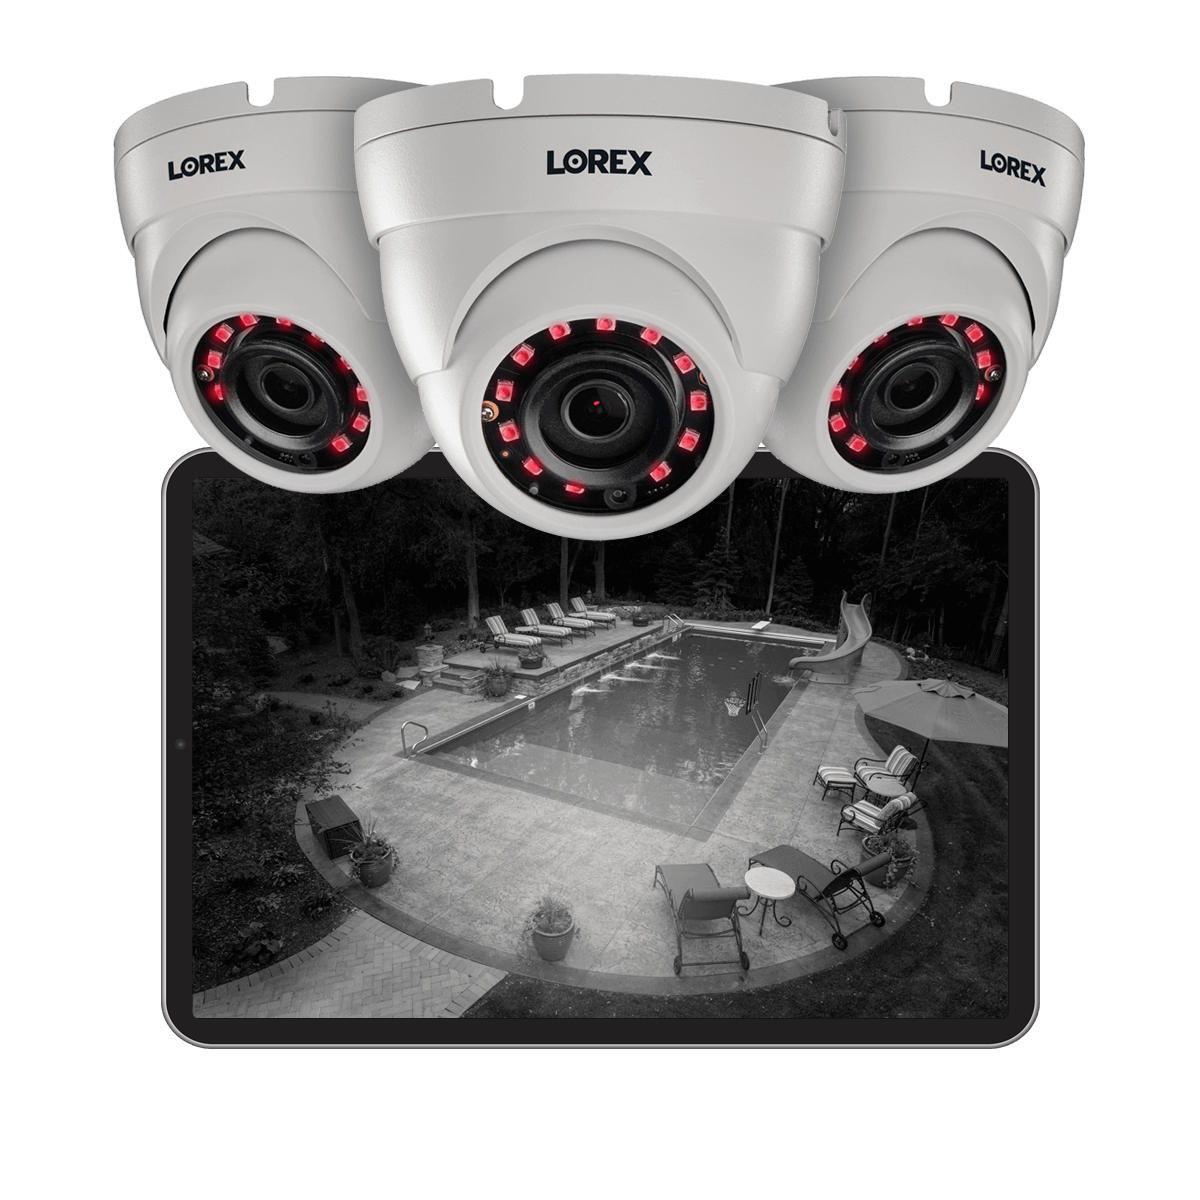 Dome analog HD security camera with night vision